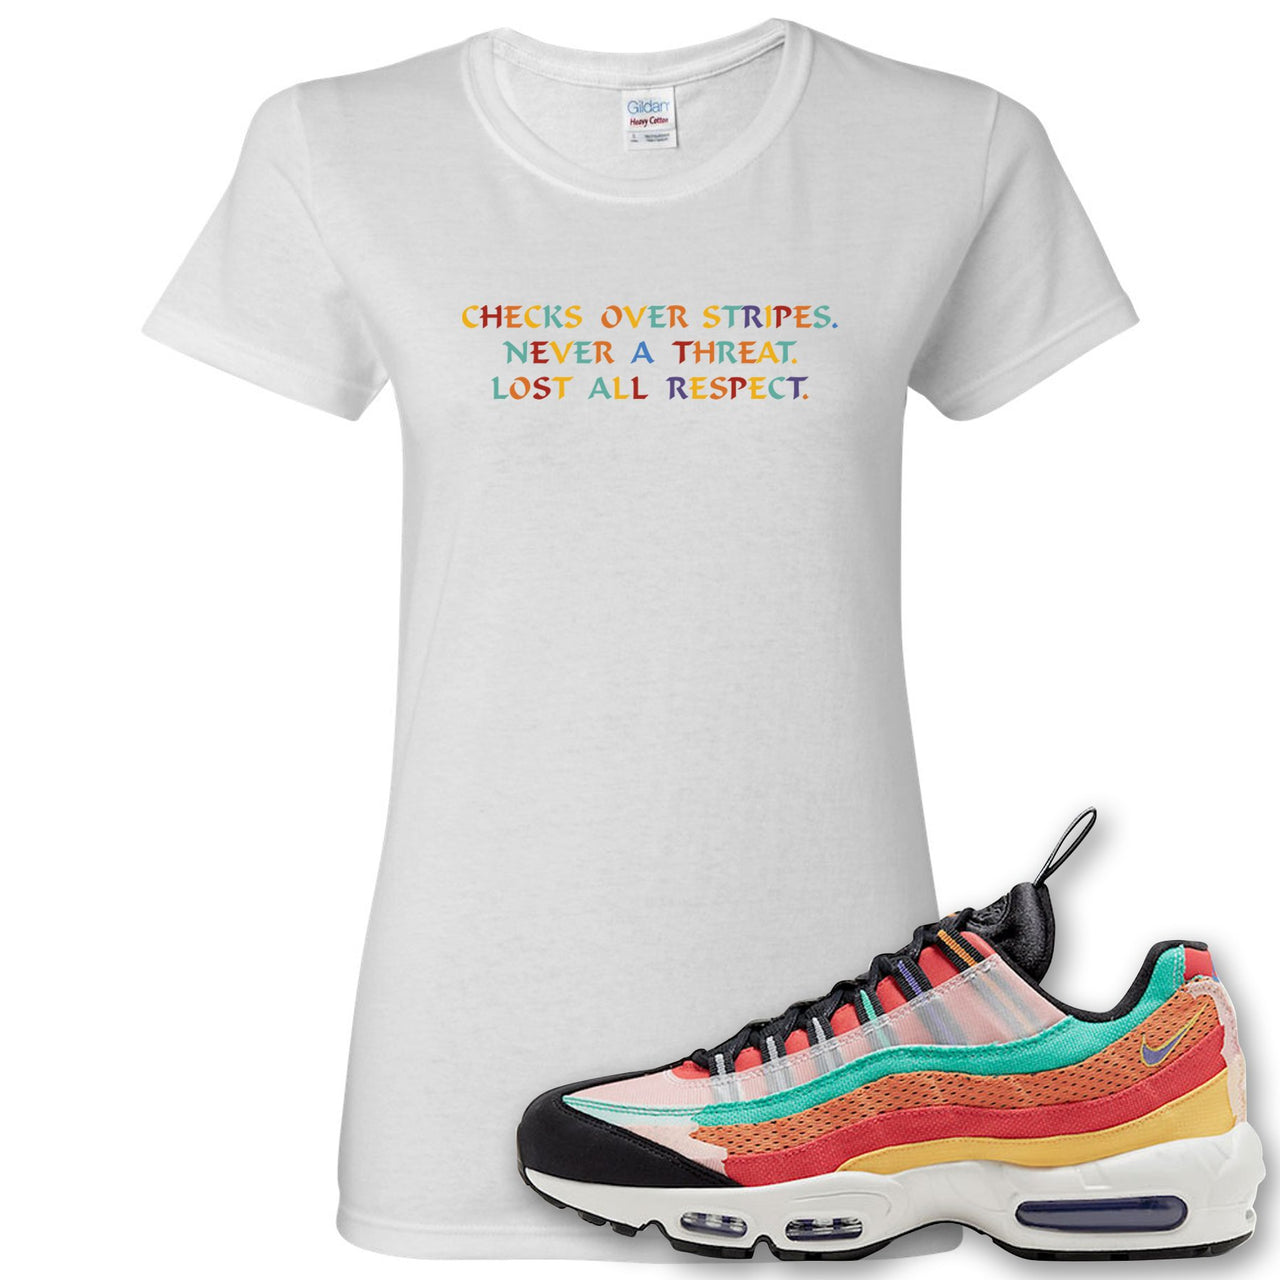 Air Max 95 Black History Month Sneaker White Women's T Shirt | Women's Tees to match Nike Air Max 95 Black History Month Shoes | Checks Over Stripes